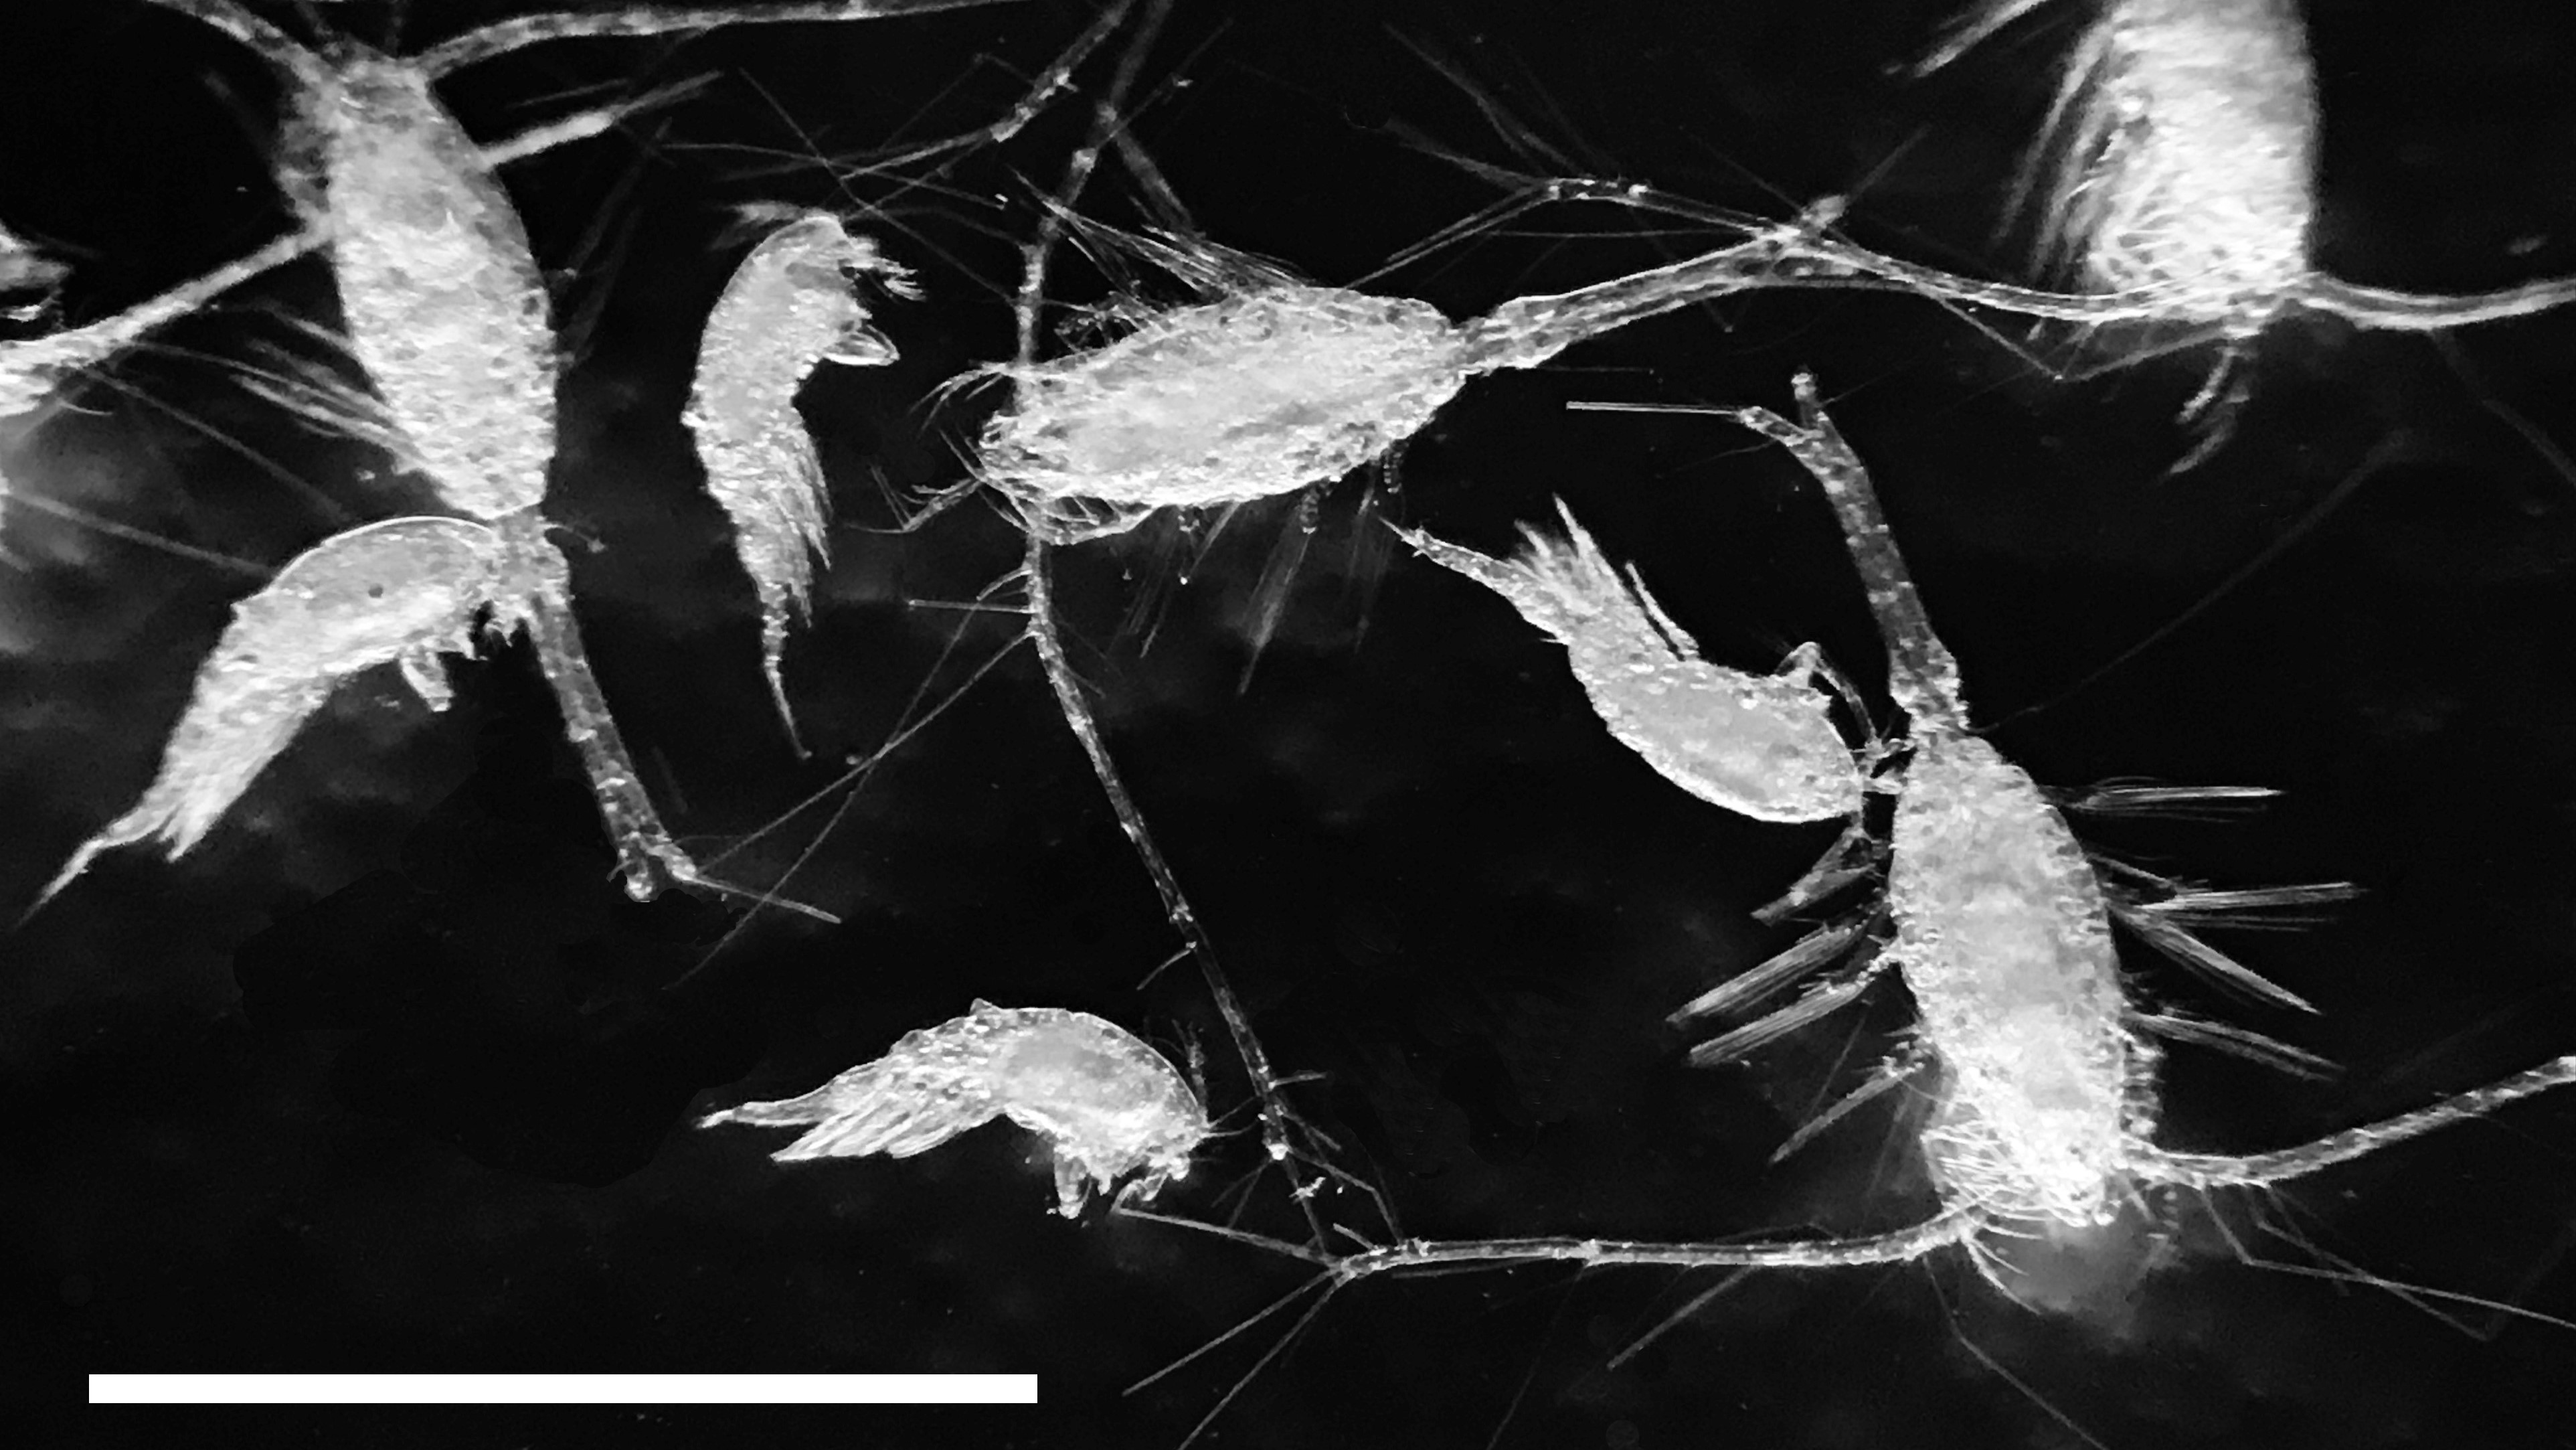 Marine copepods (pictured) are crucial to ocean carbon storage. Scale bar ≈ 1mm.